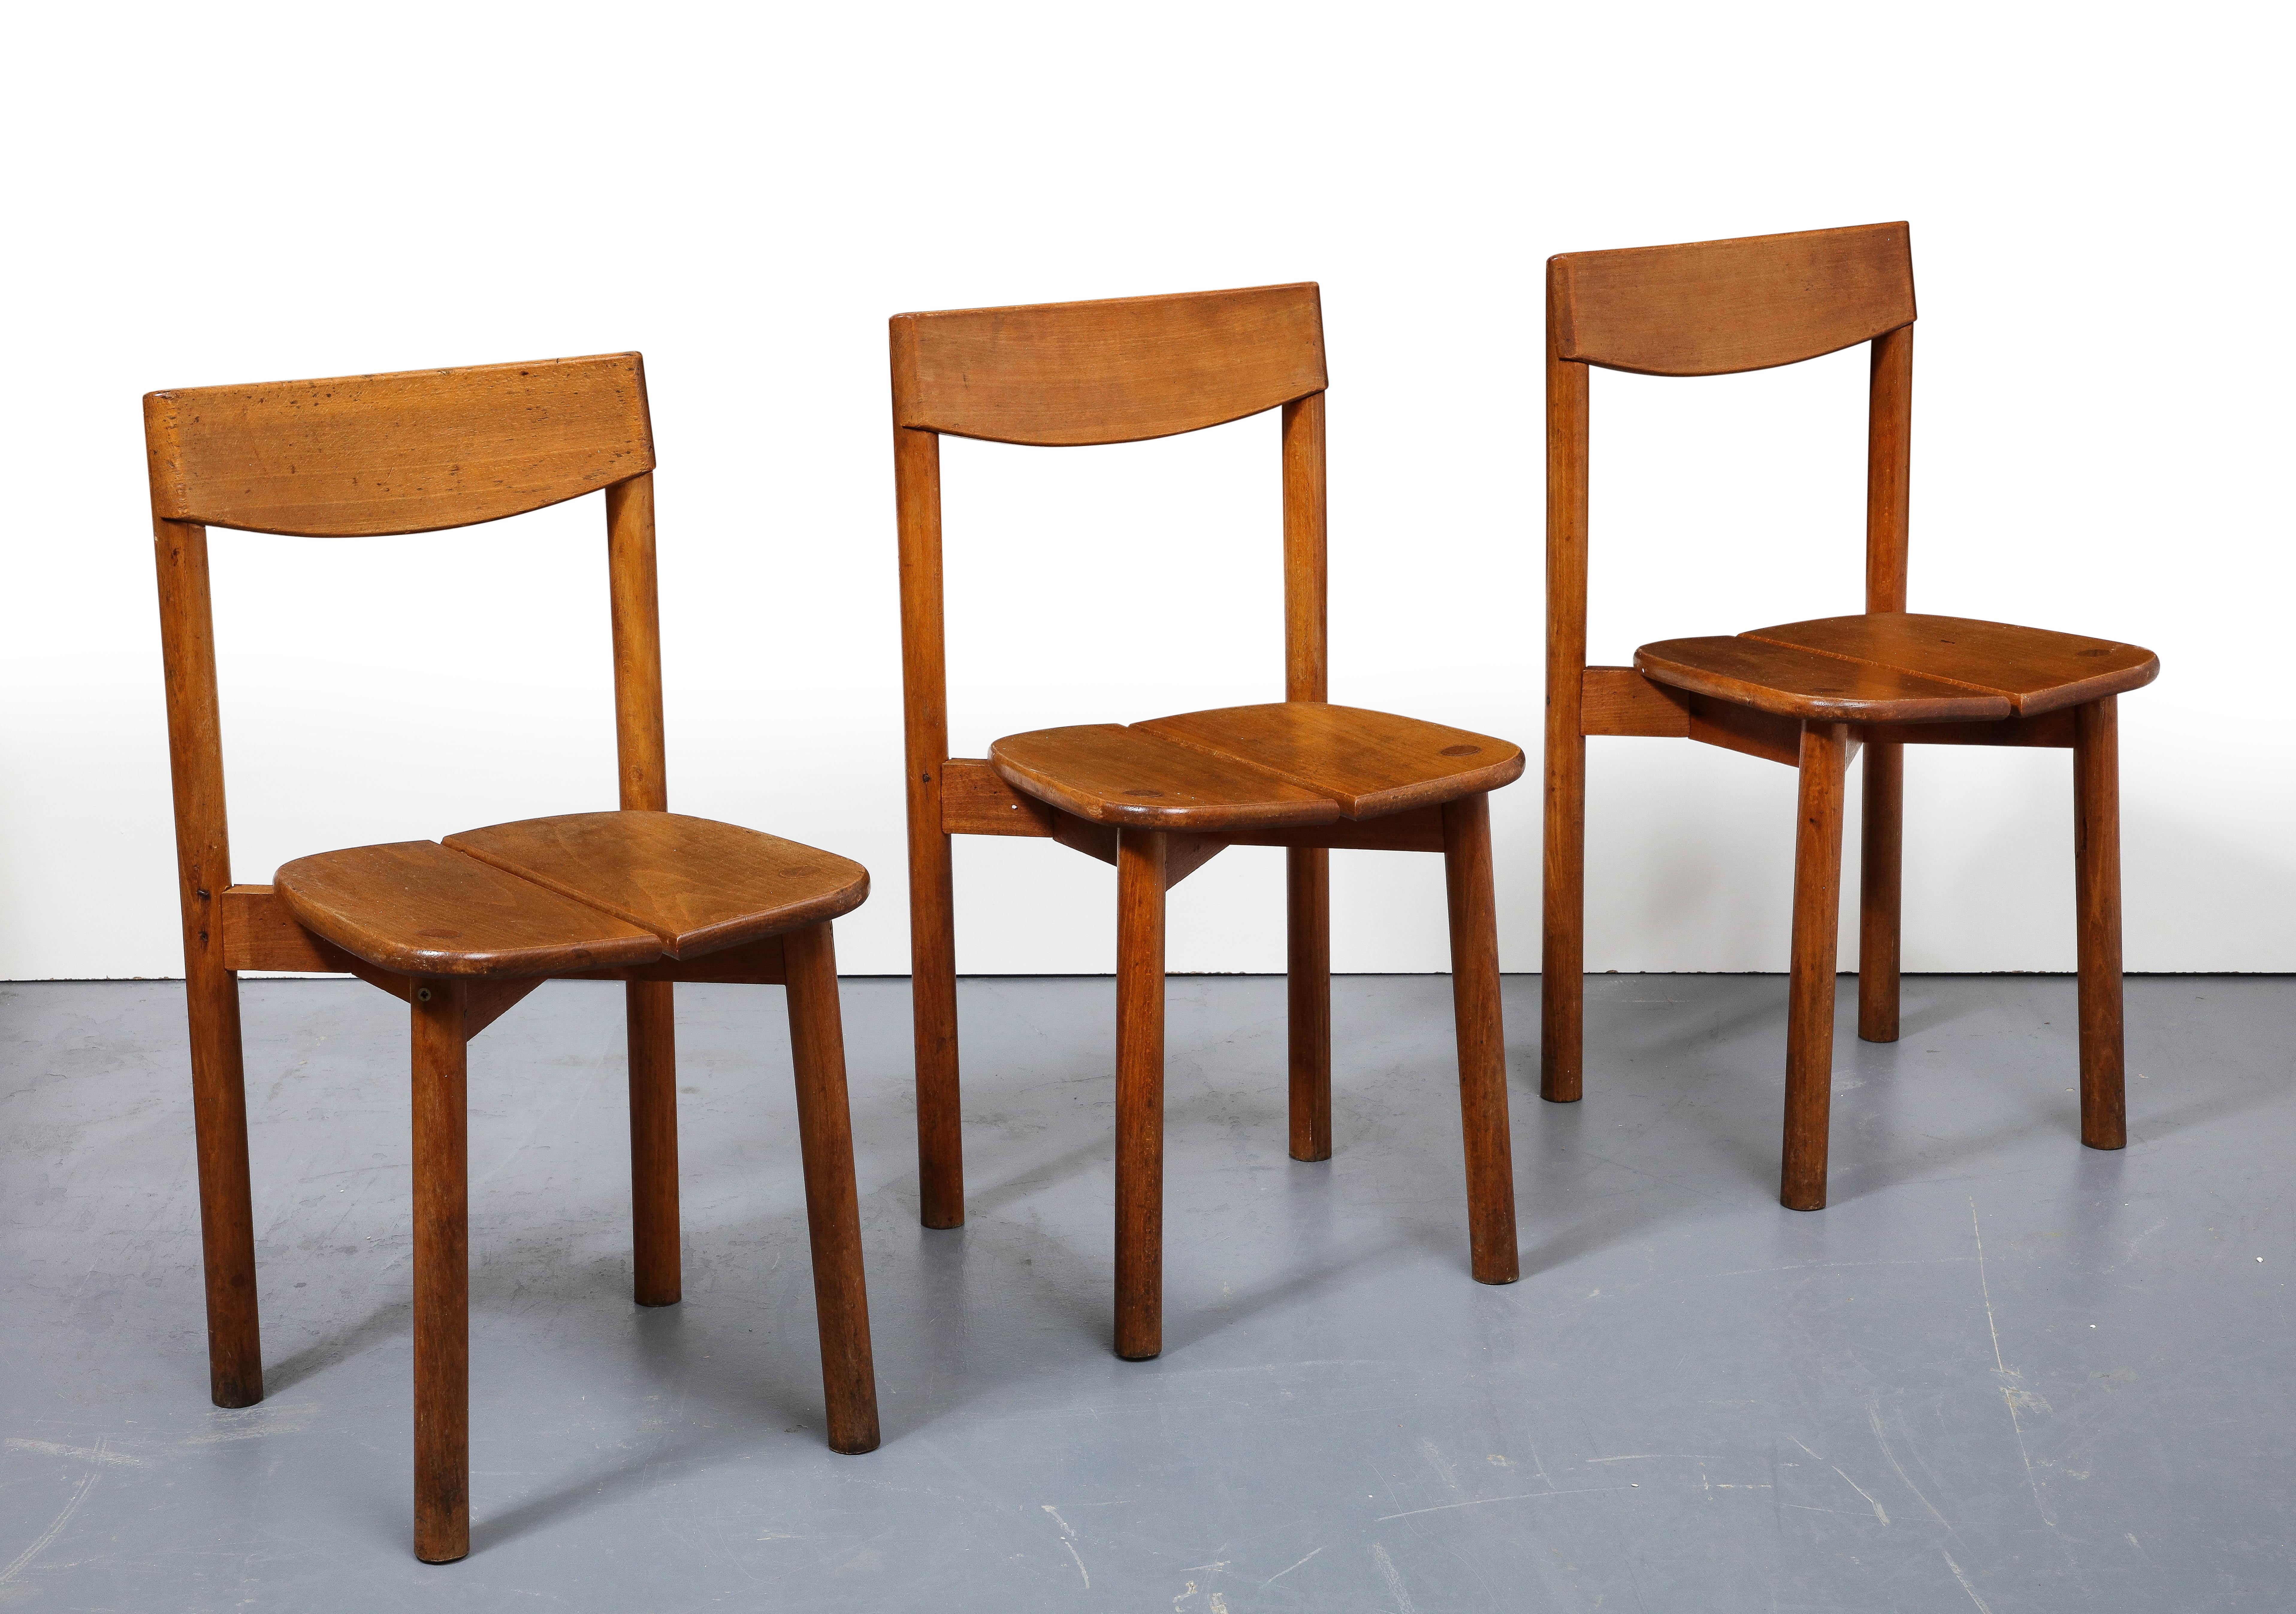 Mid-20th Century Oak Dining Chairs by Pierre Gautier-Delaye, France, circa 1950s For Sale